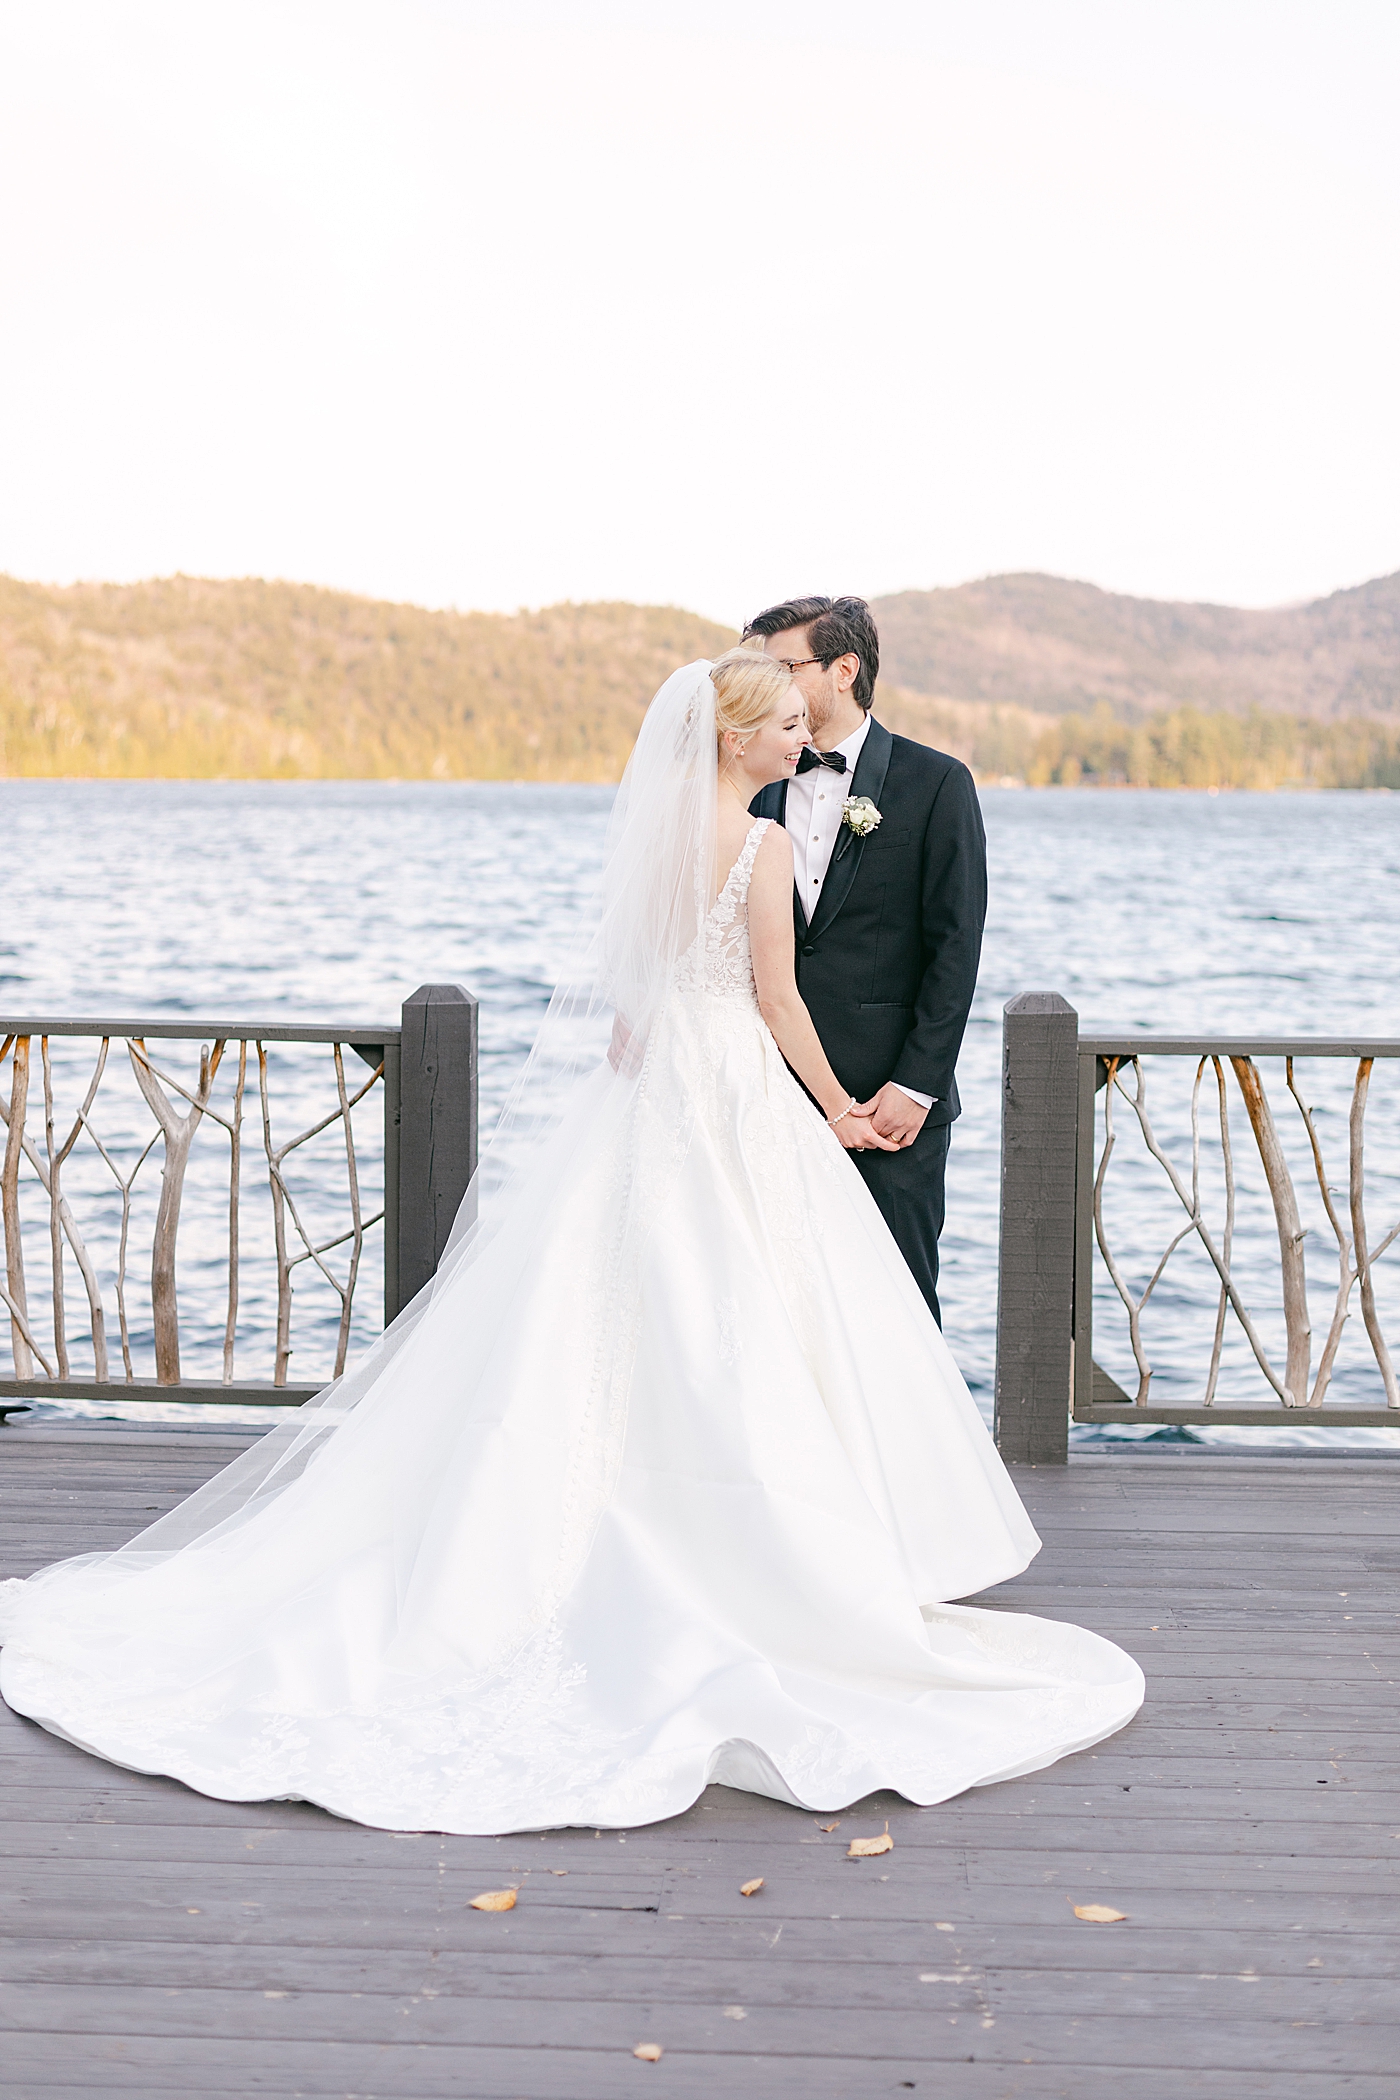 Bride and groom embracing on a dock | Image by Hope Helmuth Photography